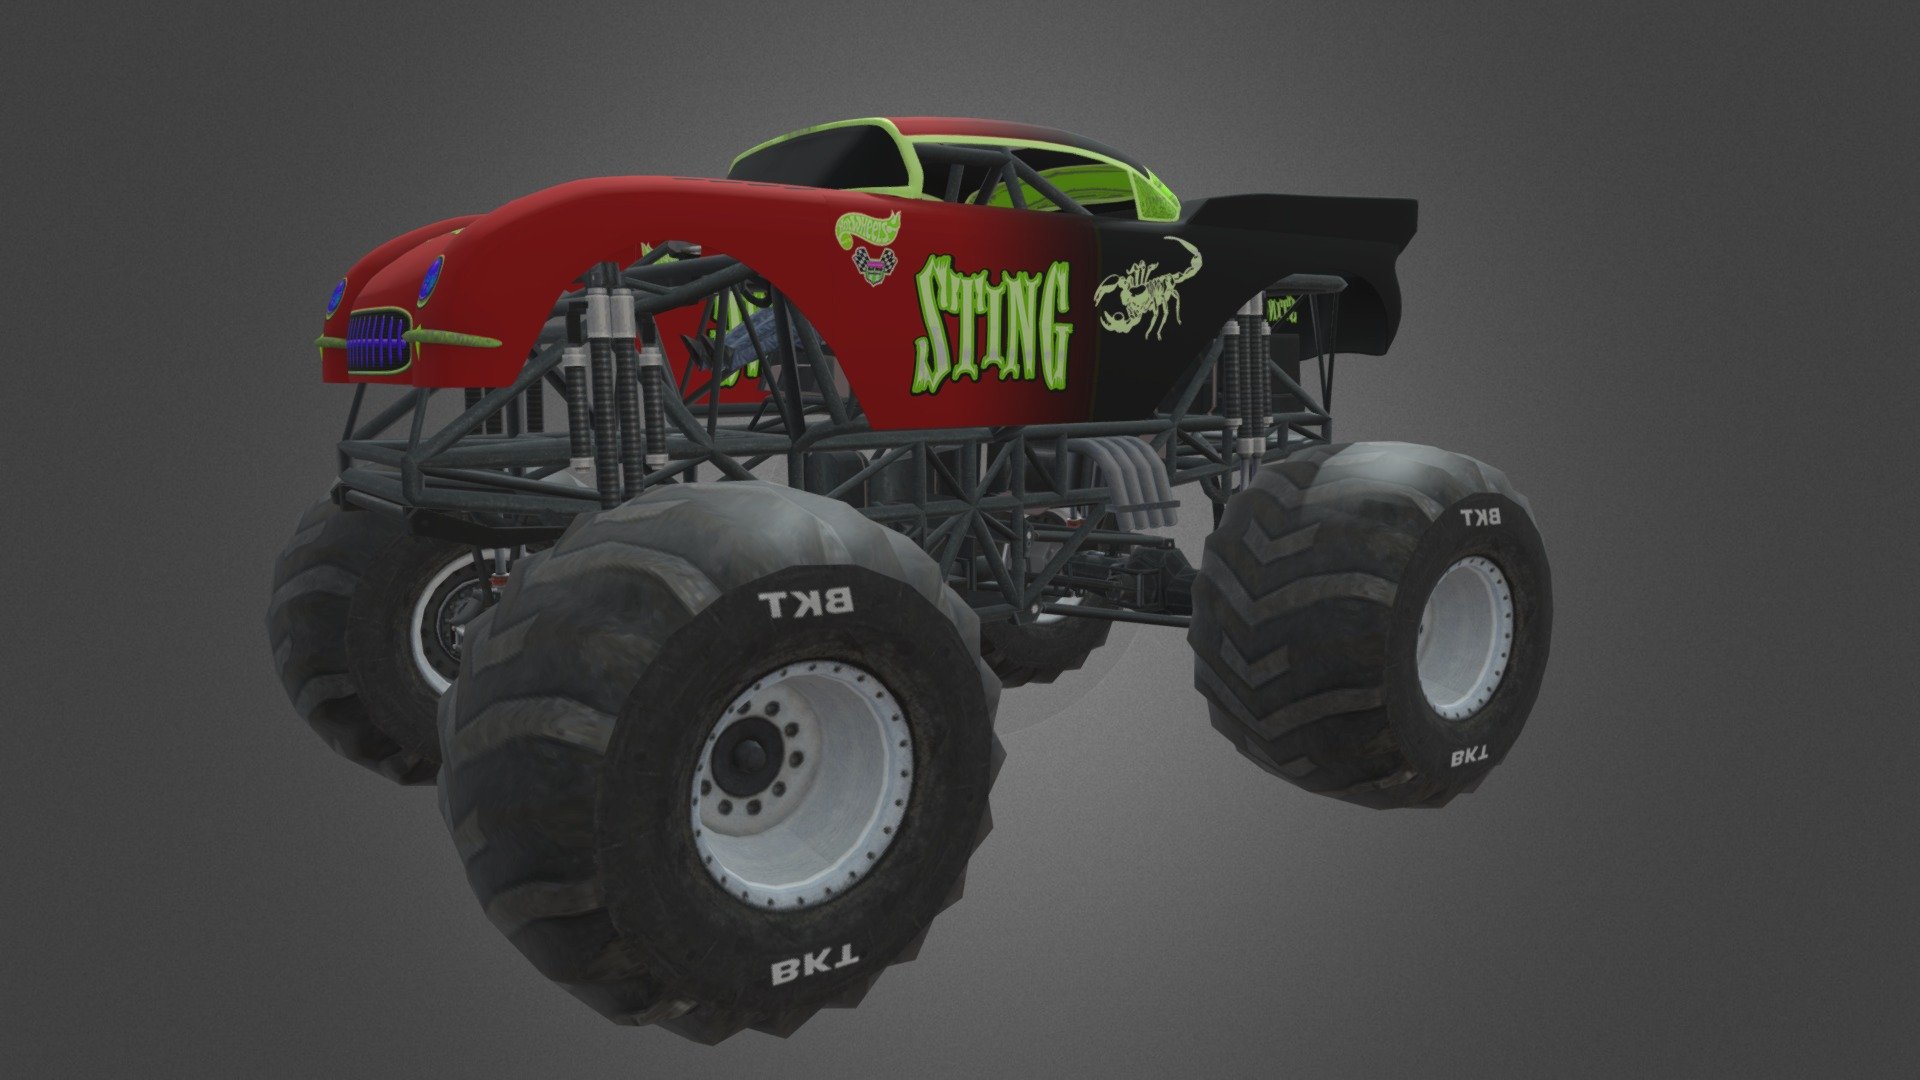 This  Monster Trucks for Mobile.

All interior and underside detail.

Monster Truck is around 6k polygons with tires, interior and driver.

Driver model is a seperate mesh.

These are optimised models so doors, hood or trunk DO NOT open.

Wheels have spindle nodes for easy animation.
Monster Truck have logical hierarchy and naming.

All textures are available in PNG format 3d model